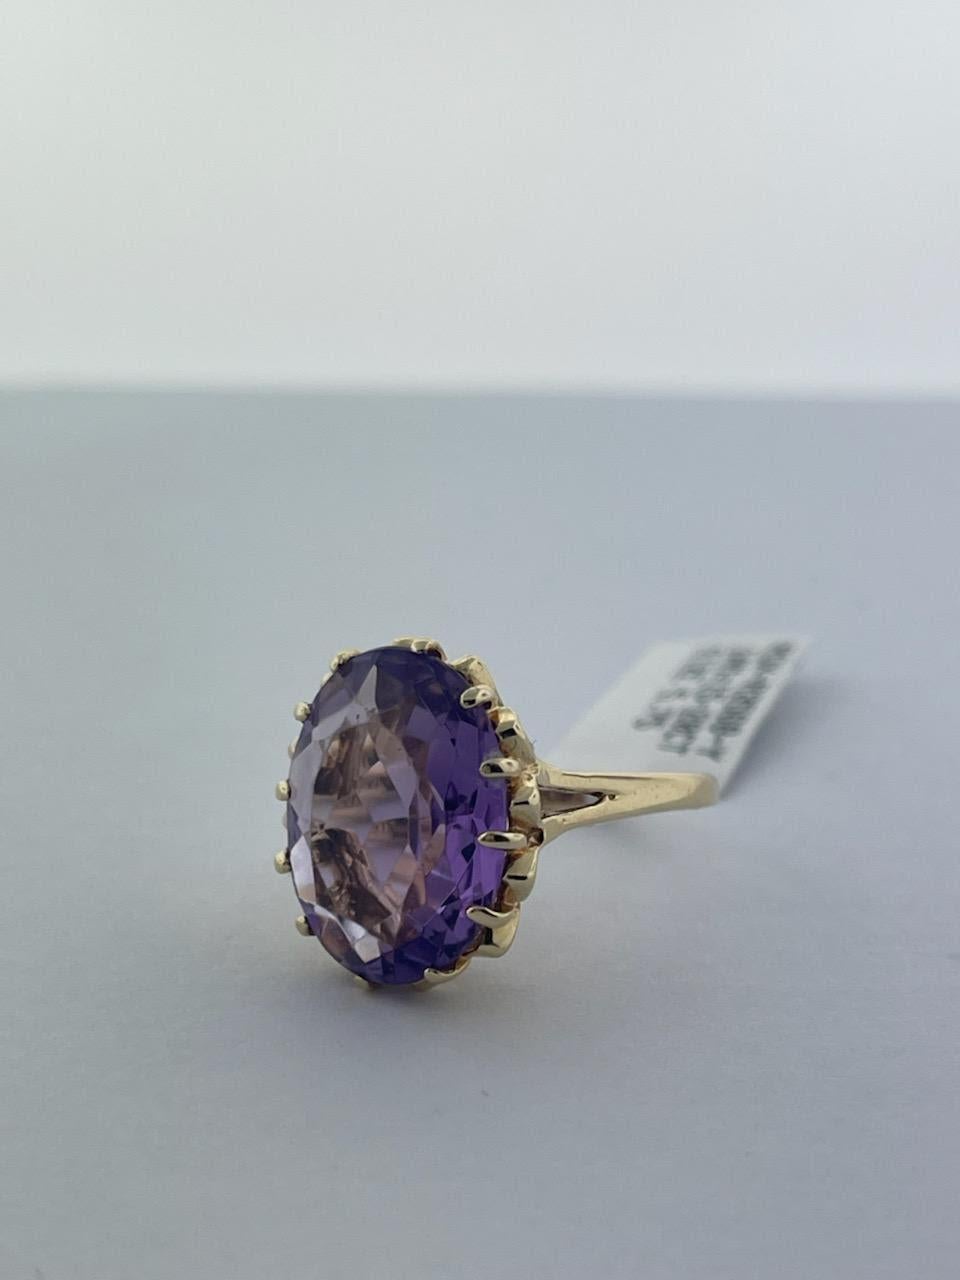 Do you fancy yourself a Royal? 
With this gorgeous amethyst ring you'll have people kissing your hand and bowing at your feet!
Oval Antique Cut Amethyst weighing approx 15-20ct (16 x 12.5mm) 
